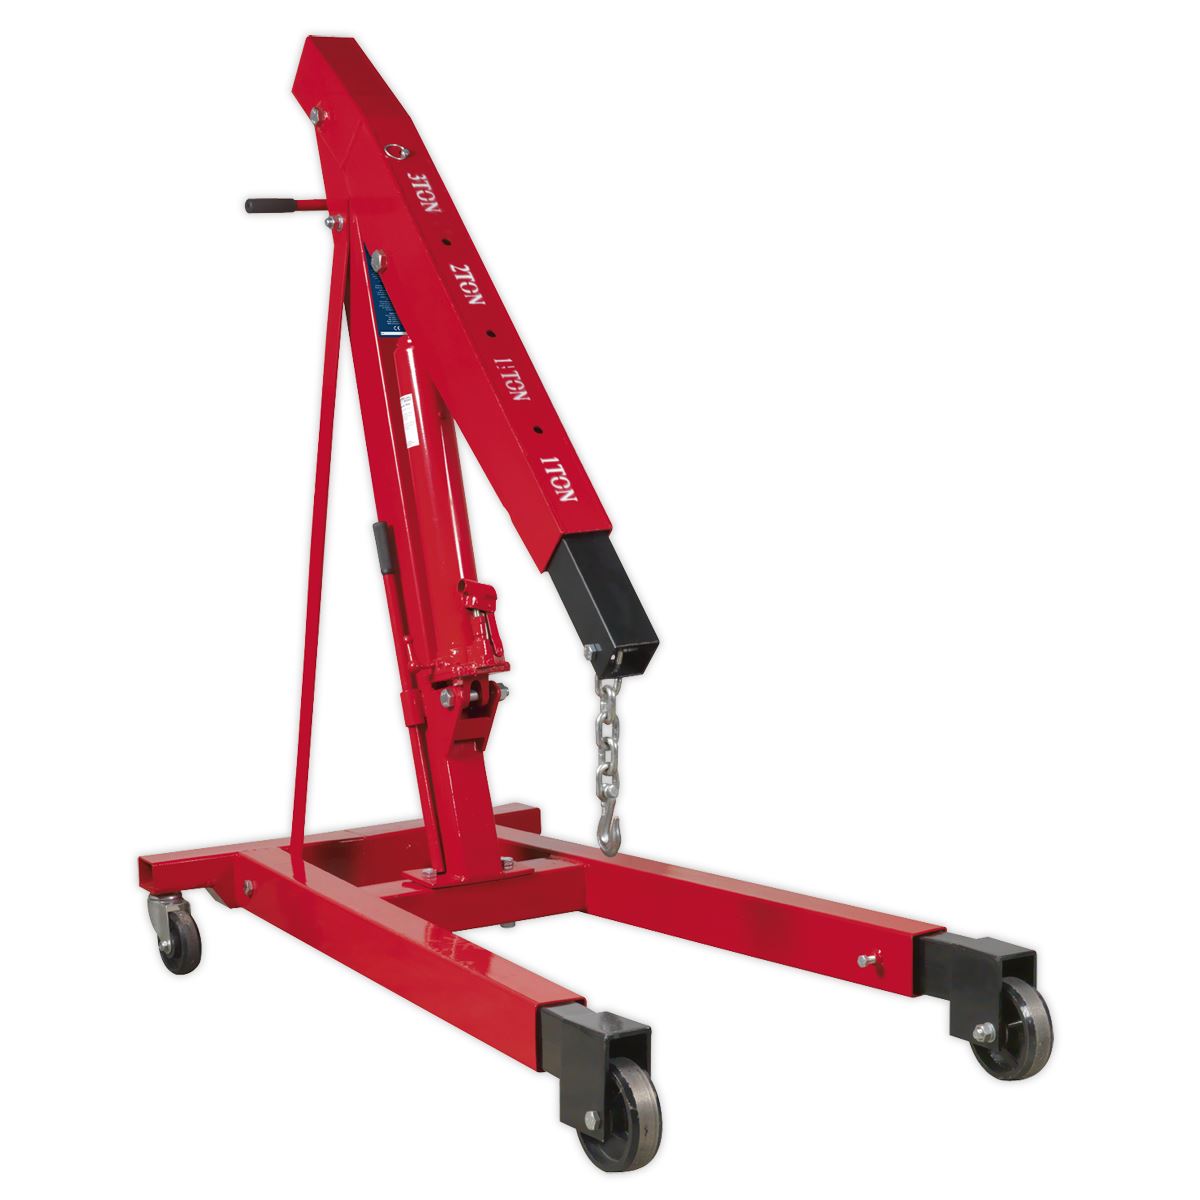 Sealey Fixed Frame Engine Crane with Extendable Legs 3 Tonne